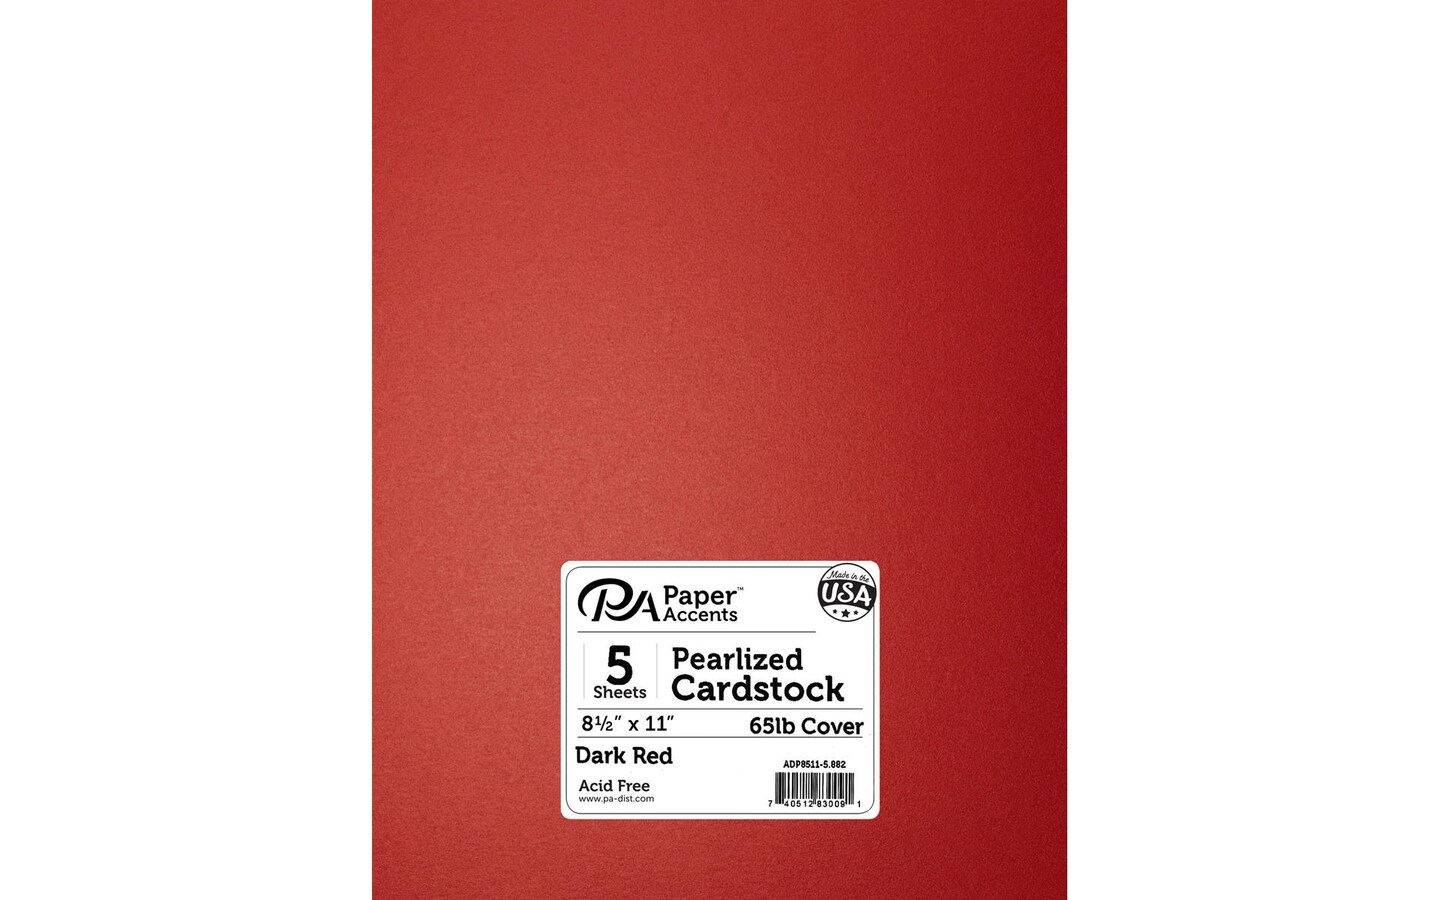 PA Paper Accents Pearlized Cardstock 8.5&#x22; x 11&#x22; Dark Red, 65lb colored cardstock paper for card making, scrapbooking, printing, quilling and crafts, 5 piece pack